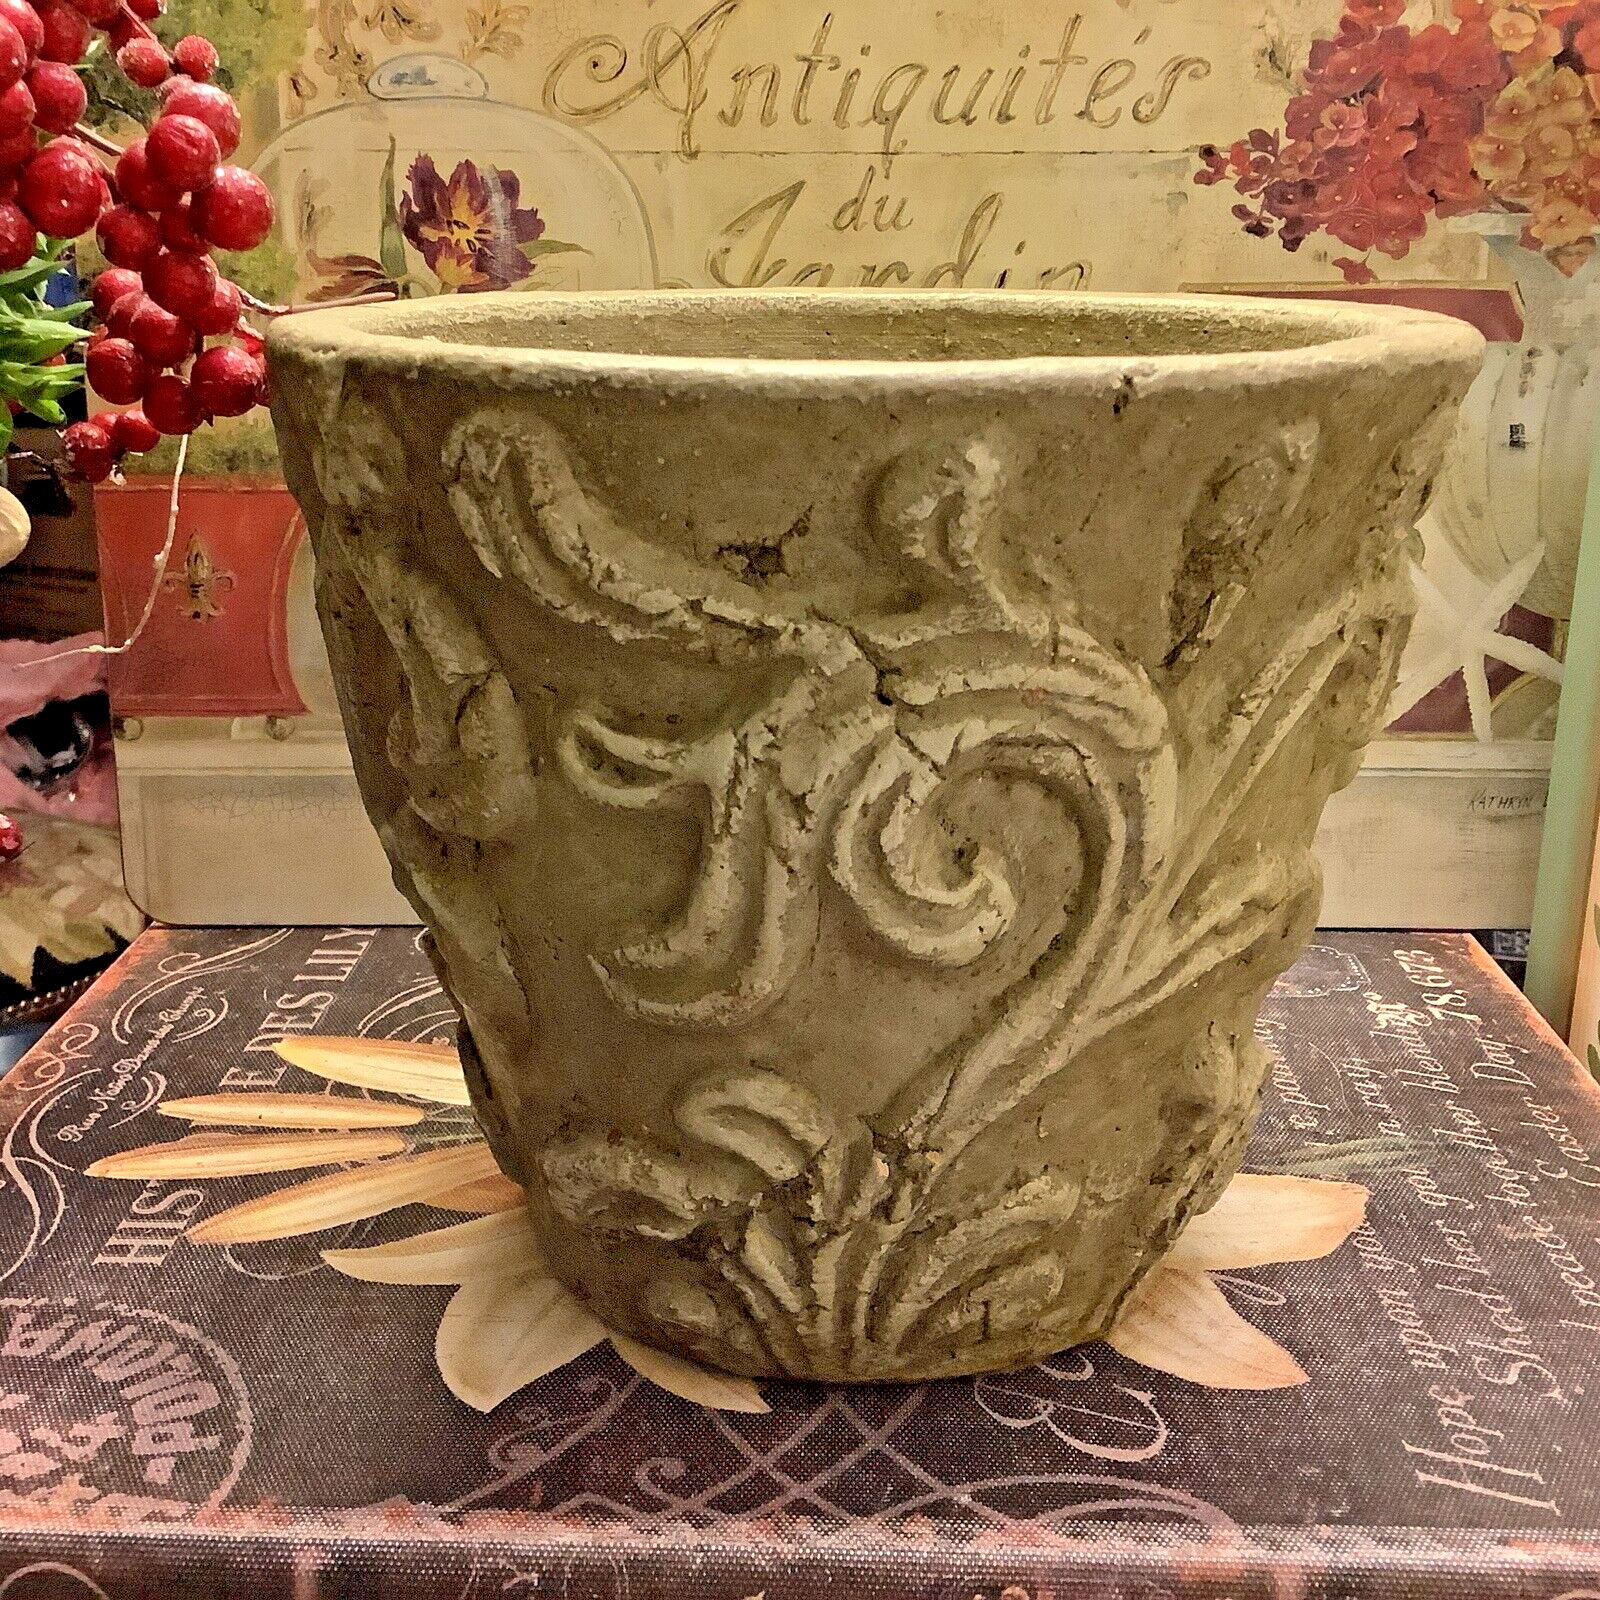 Beautiful Old/Vintage Inspired~Flower/Cache’ Pot~w/Relief Design~6.5”H X 7.75” R